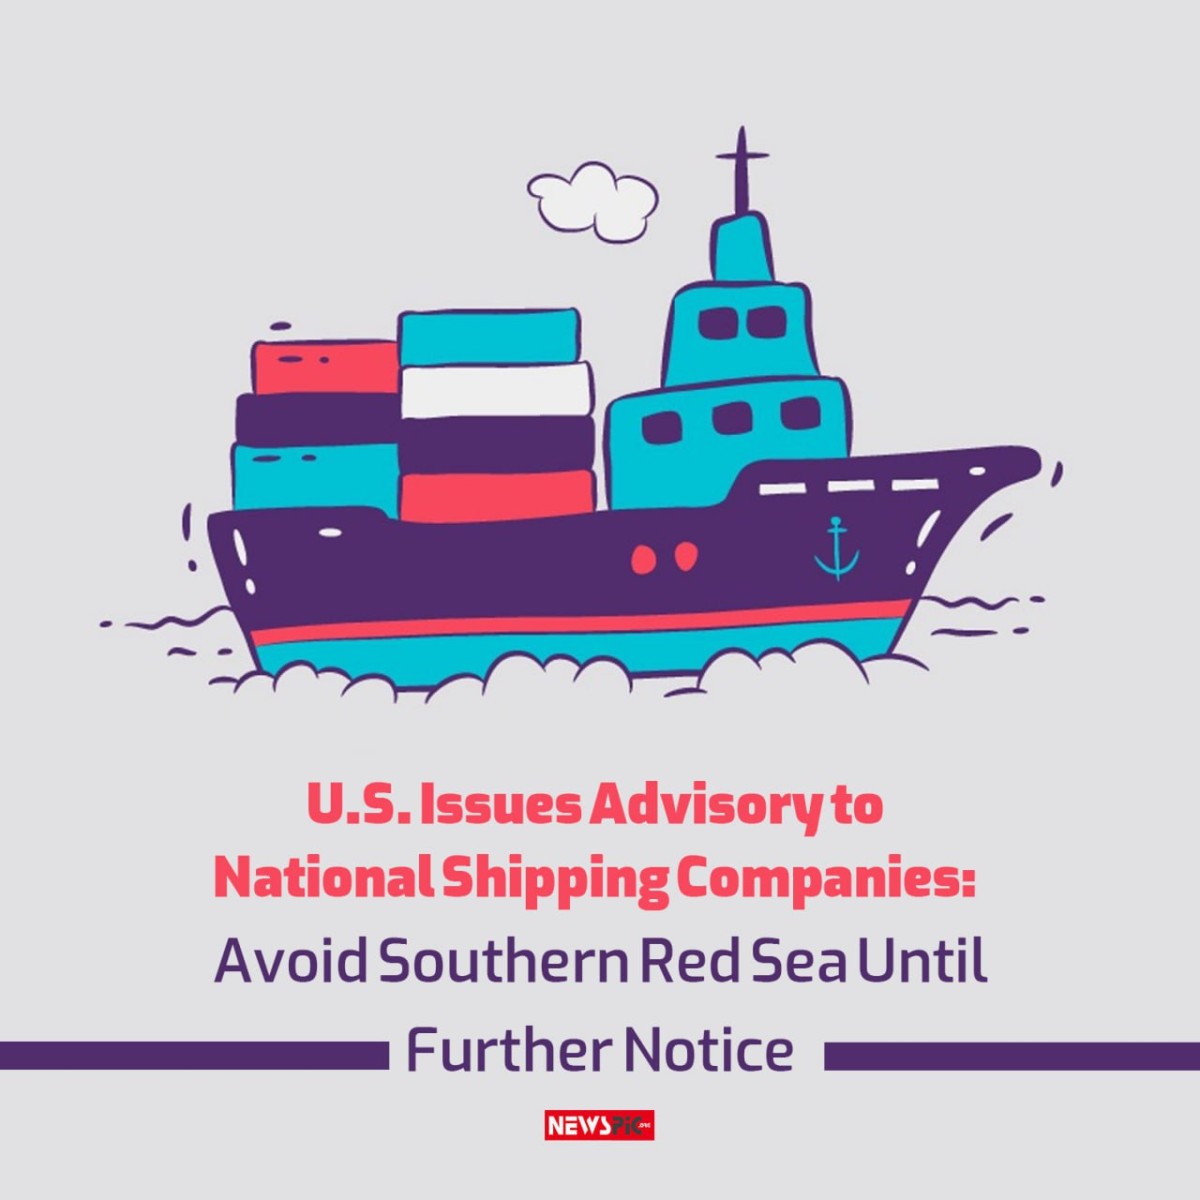 U.S.Issues Advisory to National Shipping Companies: Avoid Southern Red Sea Until Further Notice